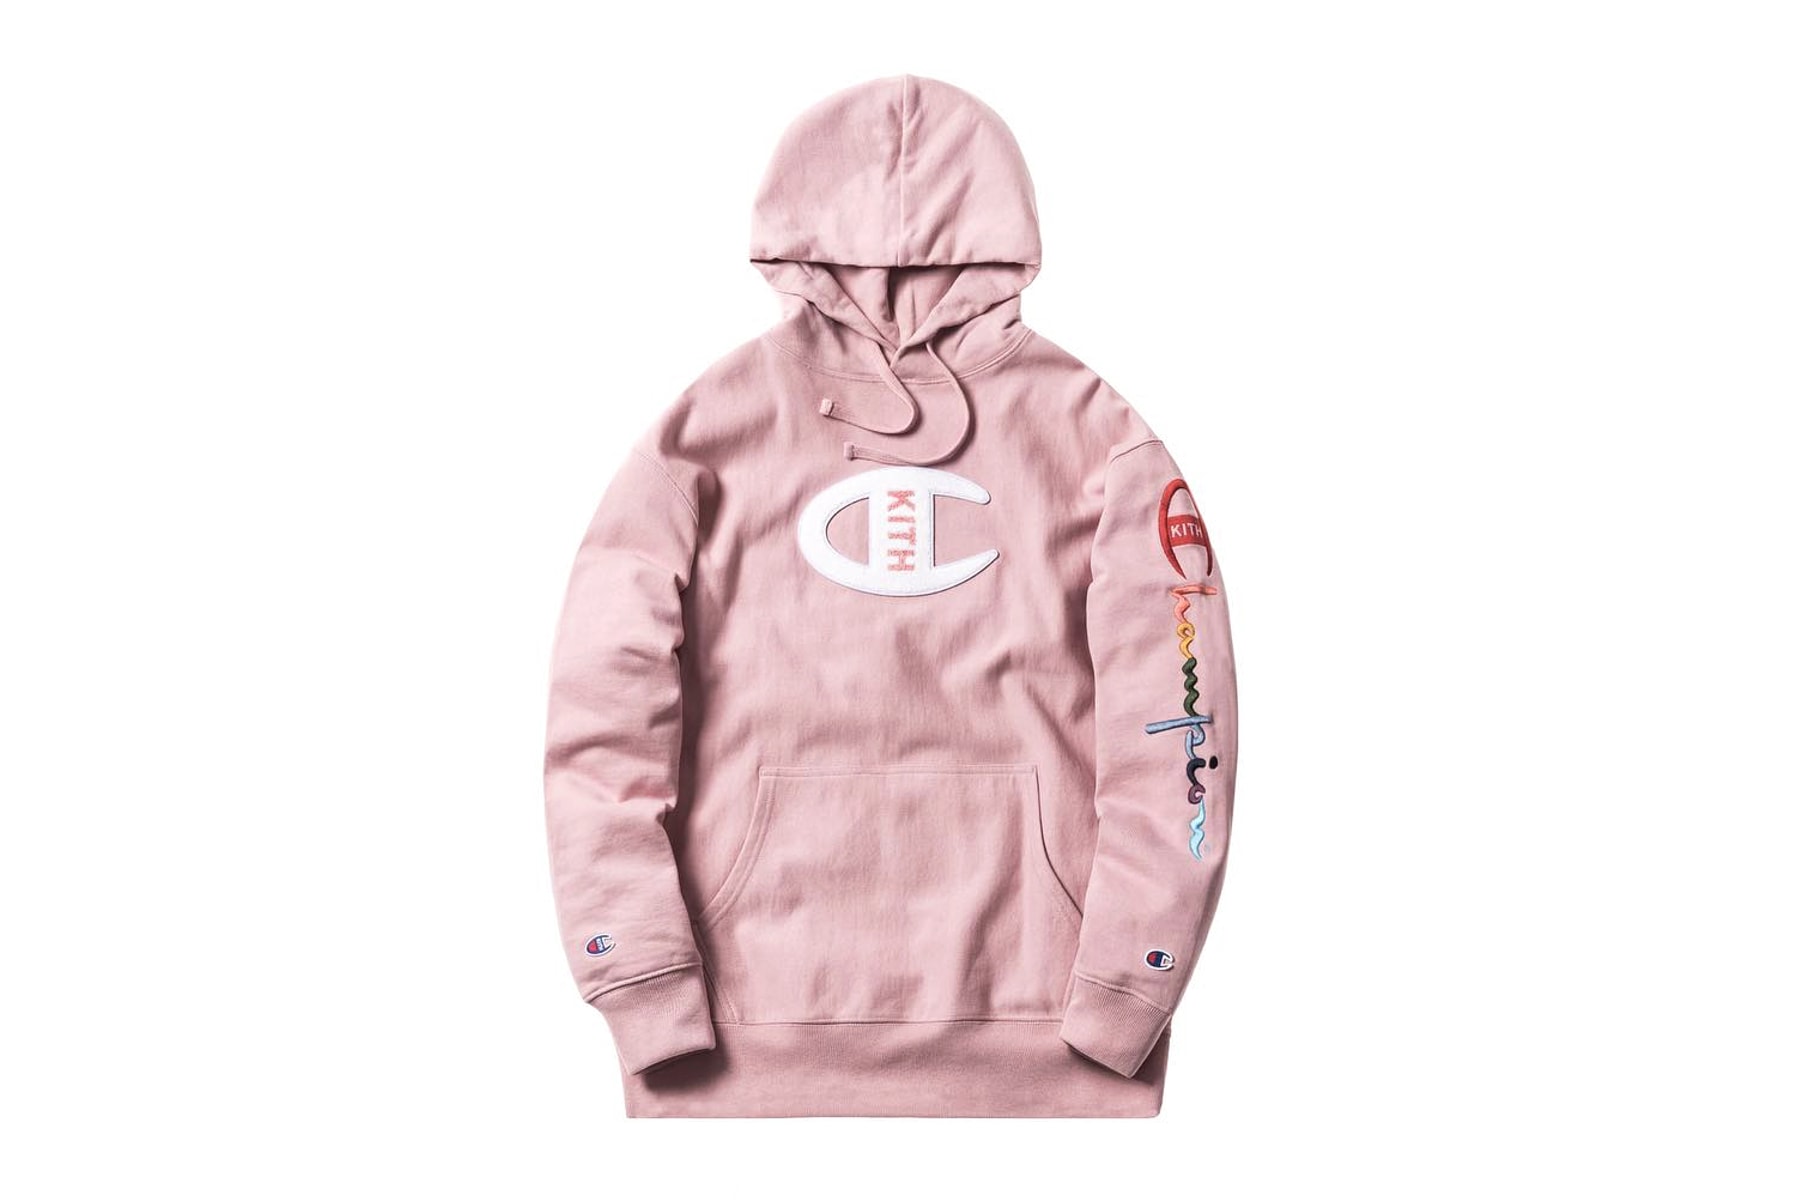 KITH Champion Collaboration Net-a-Porter Pink